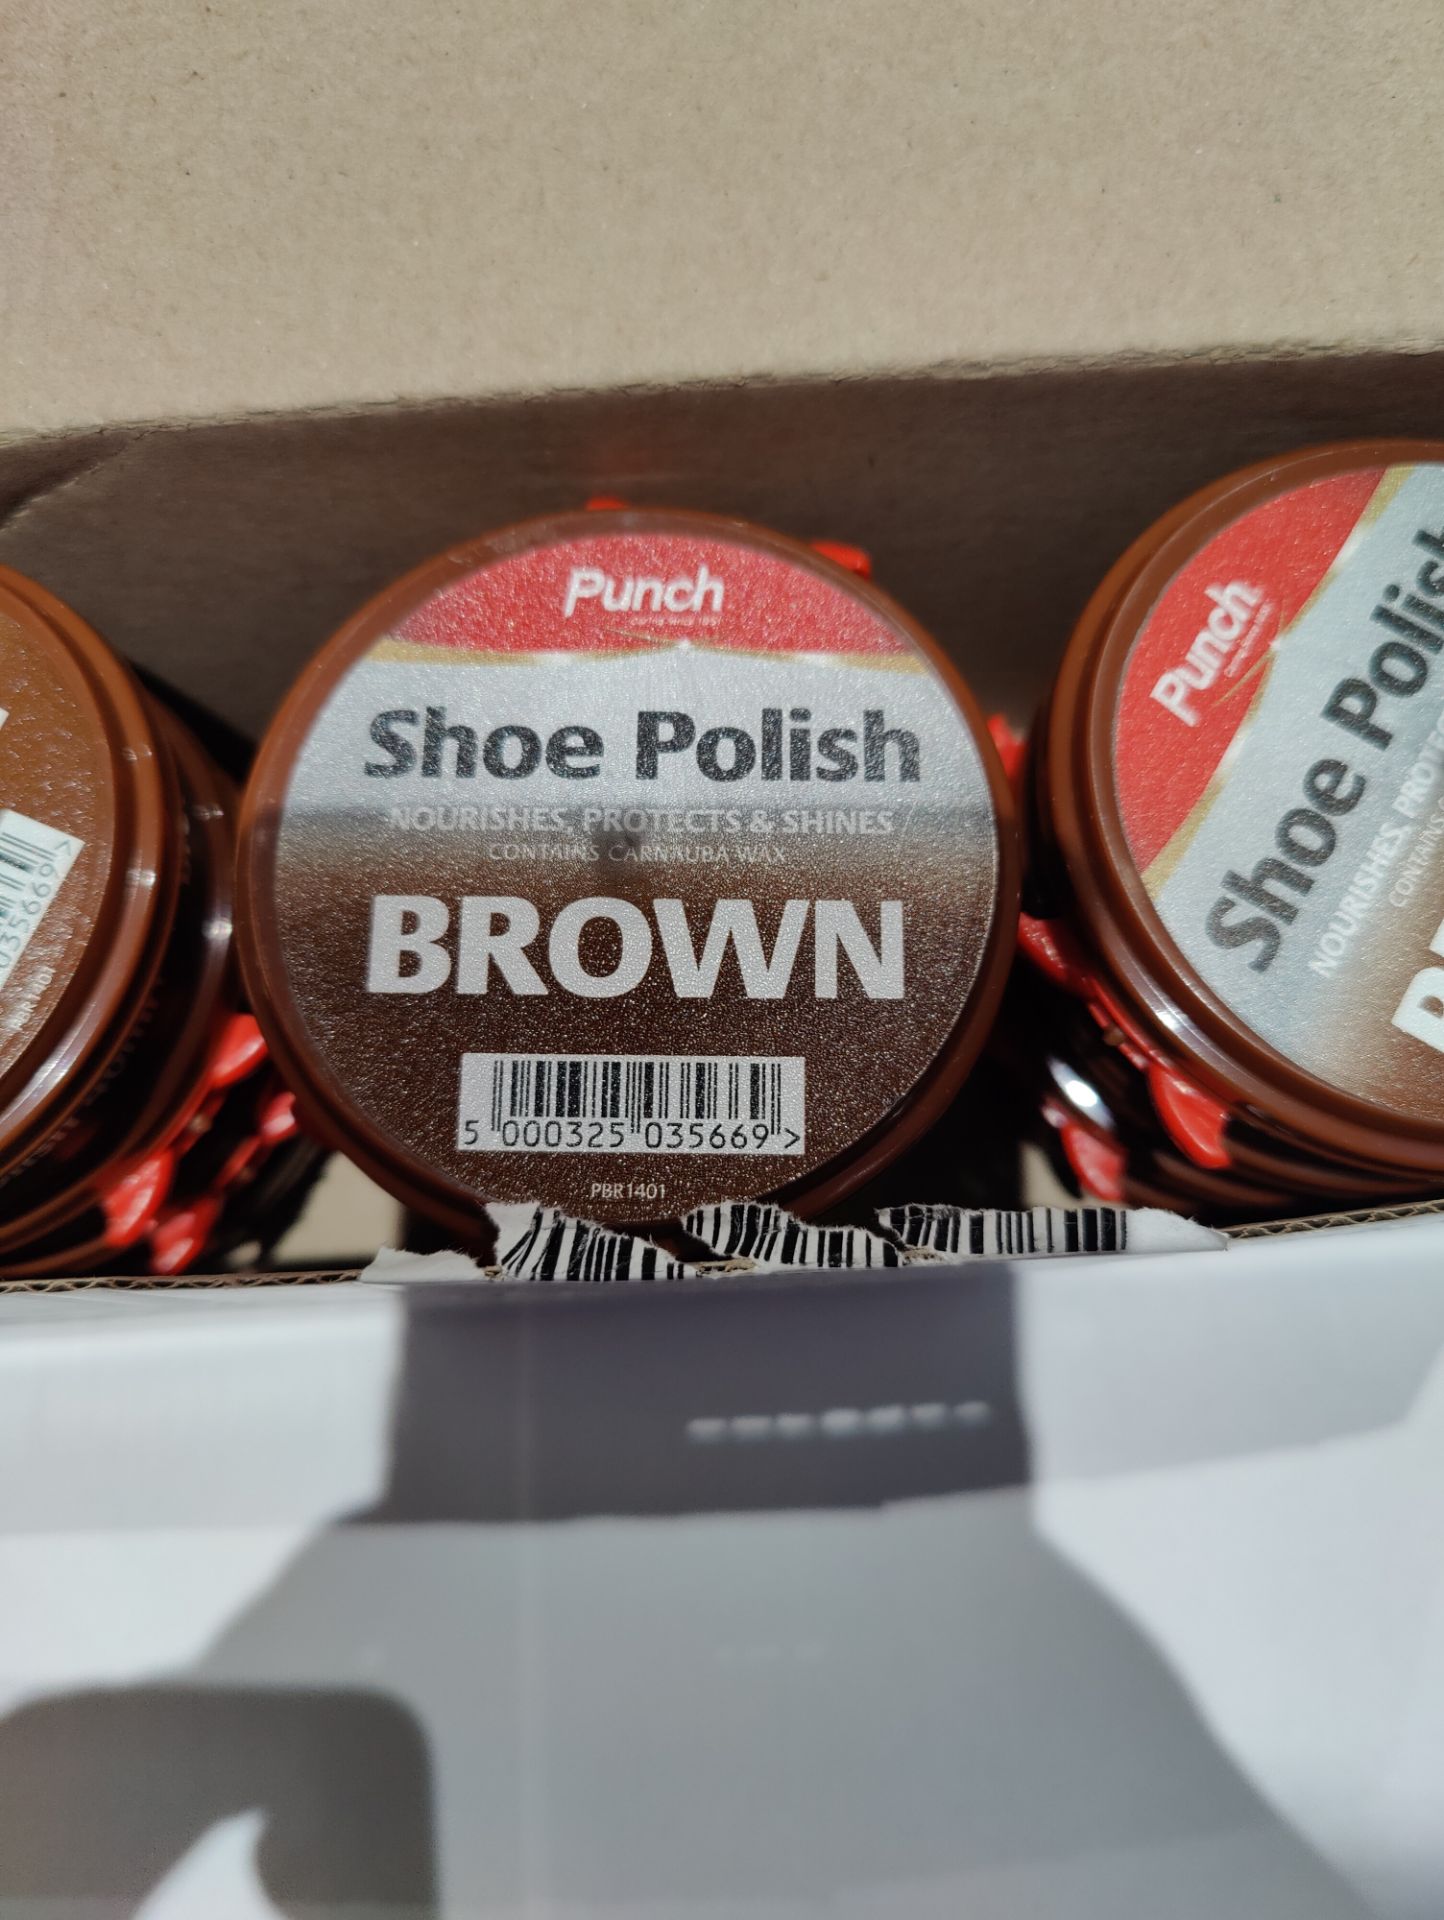 Clearance Joblot Box of 24 Punch Shoe Polish Black, Brown and 6 Scuff - Image 4 of 5